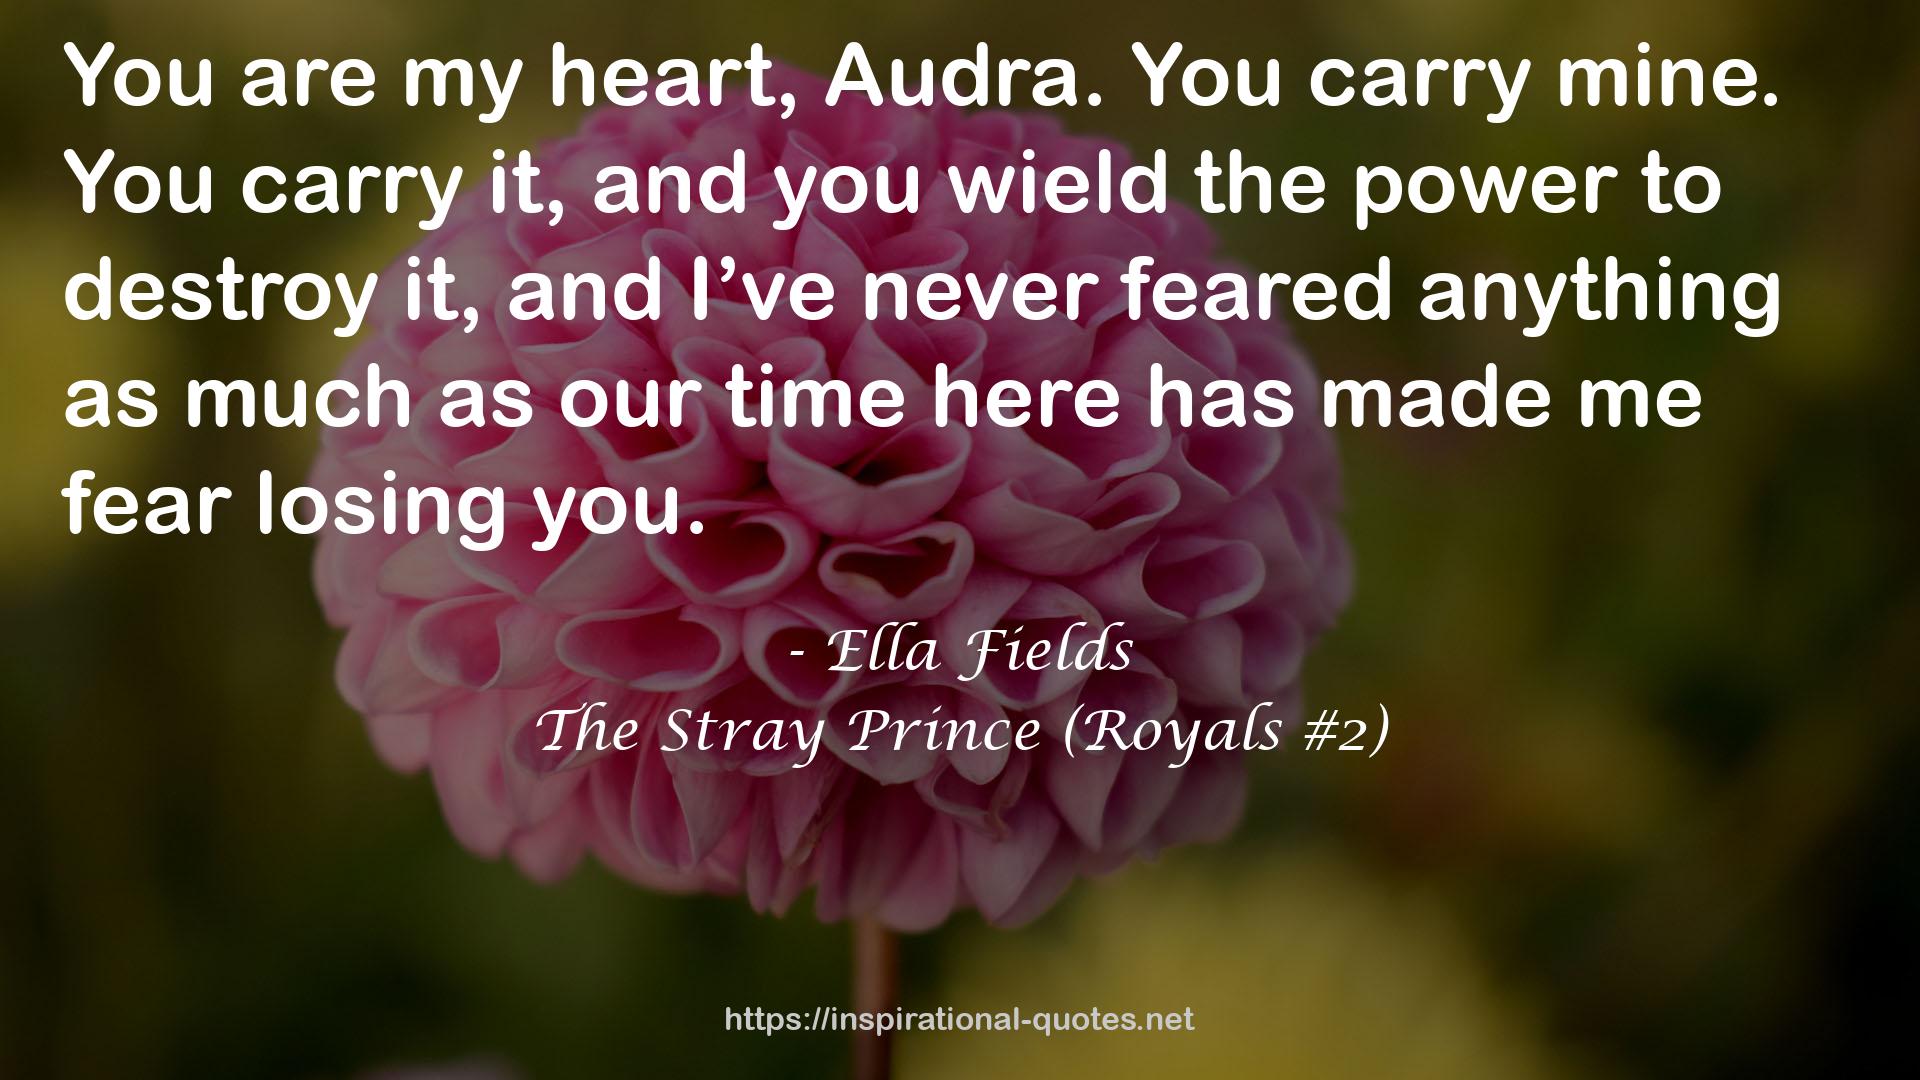 The Stray Prince (Royals #2) QUOTES